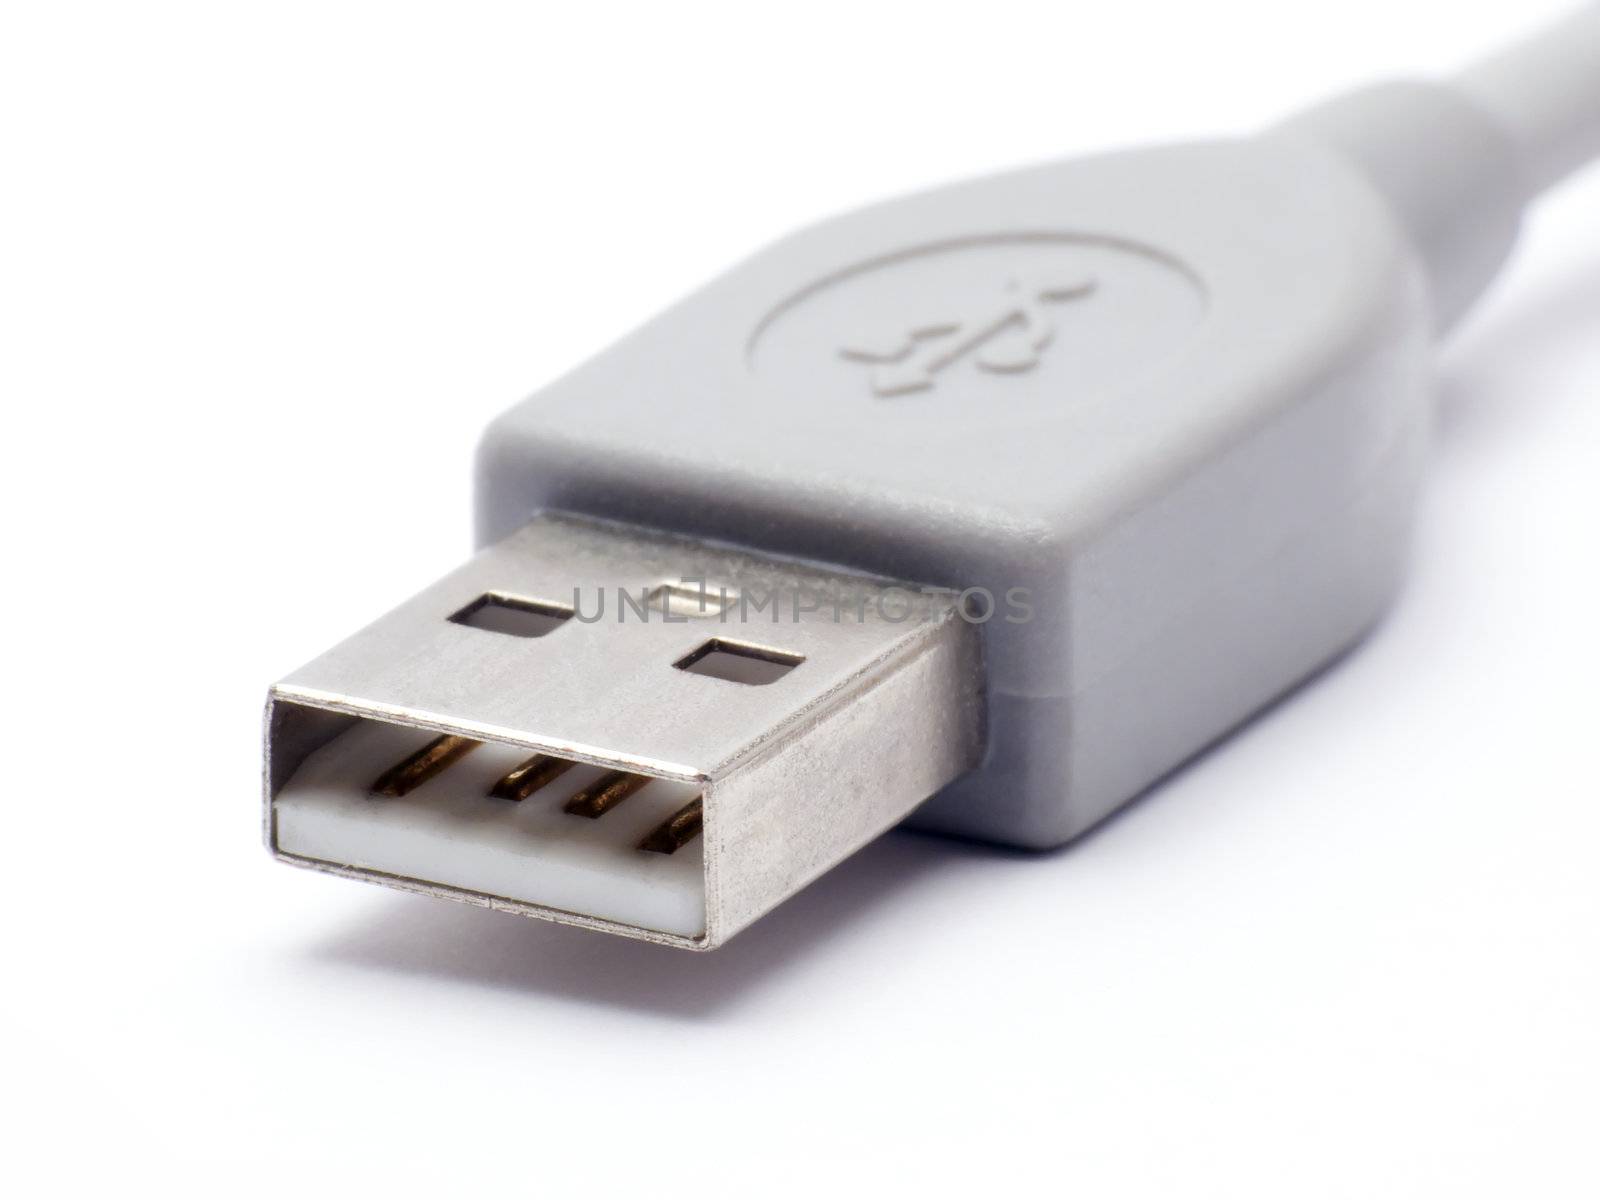 Closeup of an USB connector also showing the USB symbol